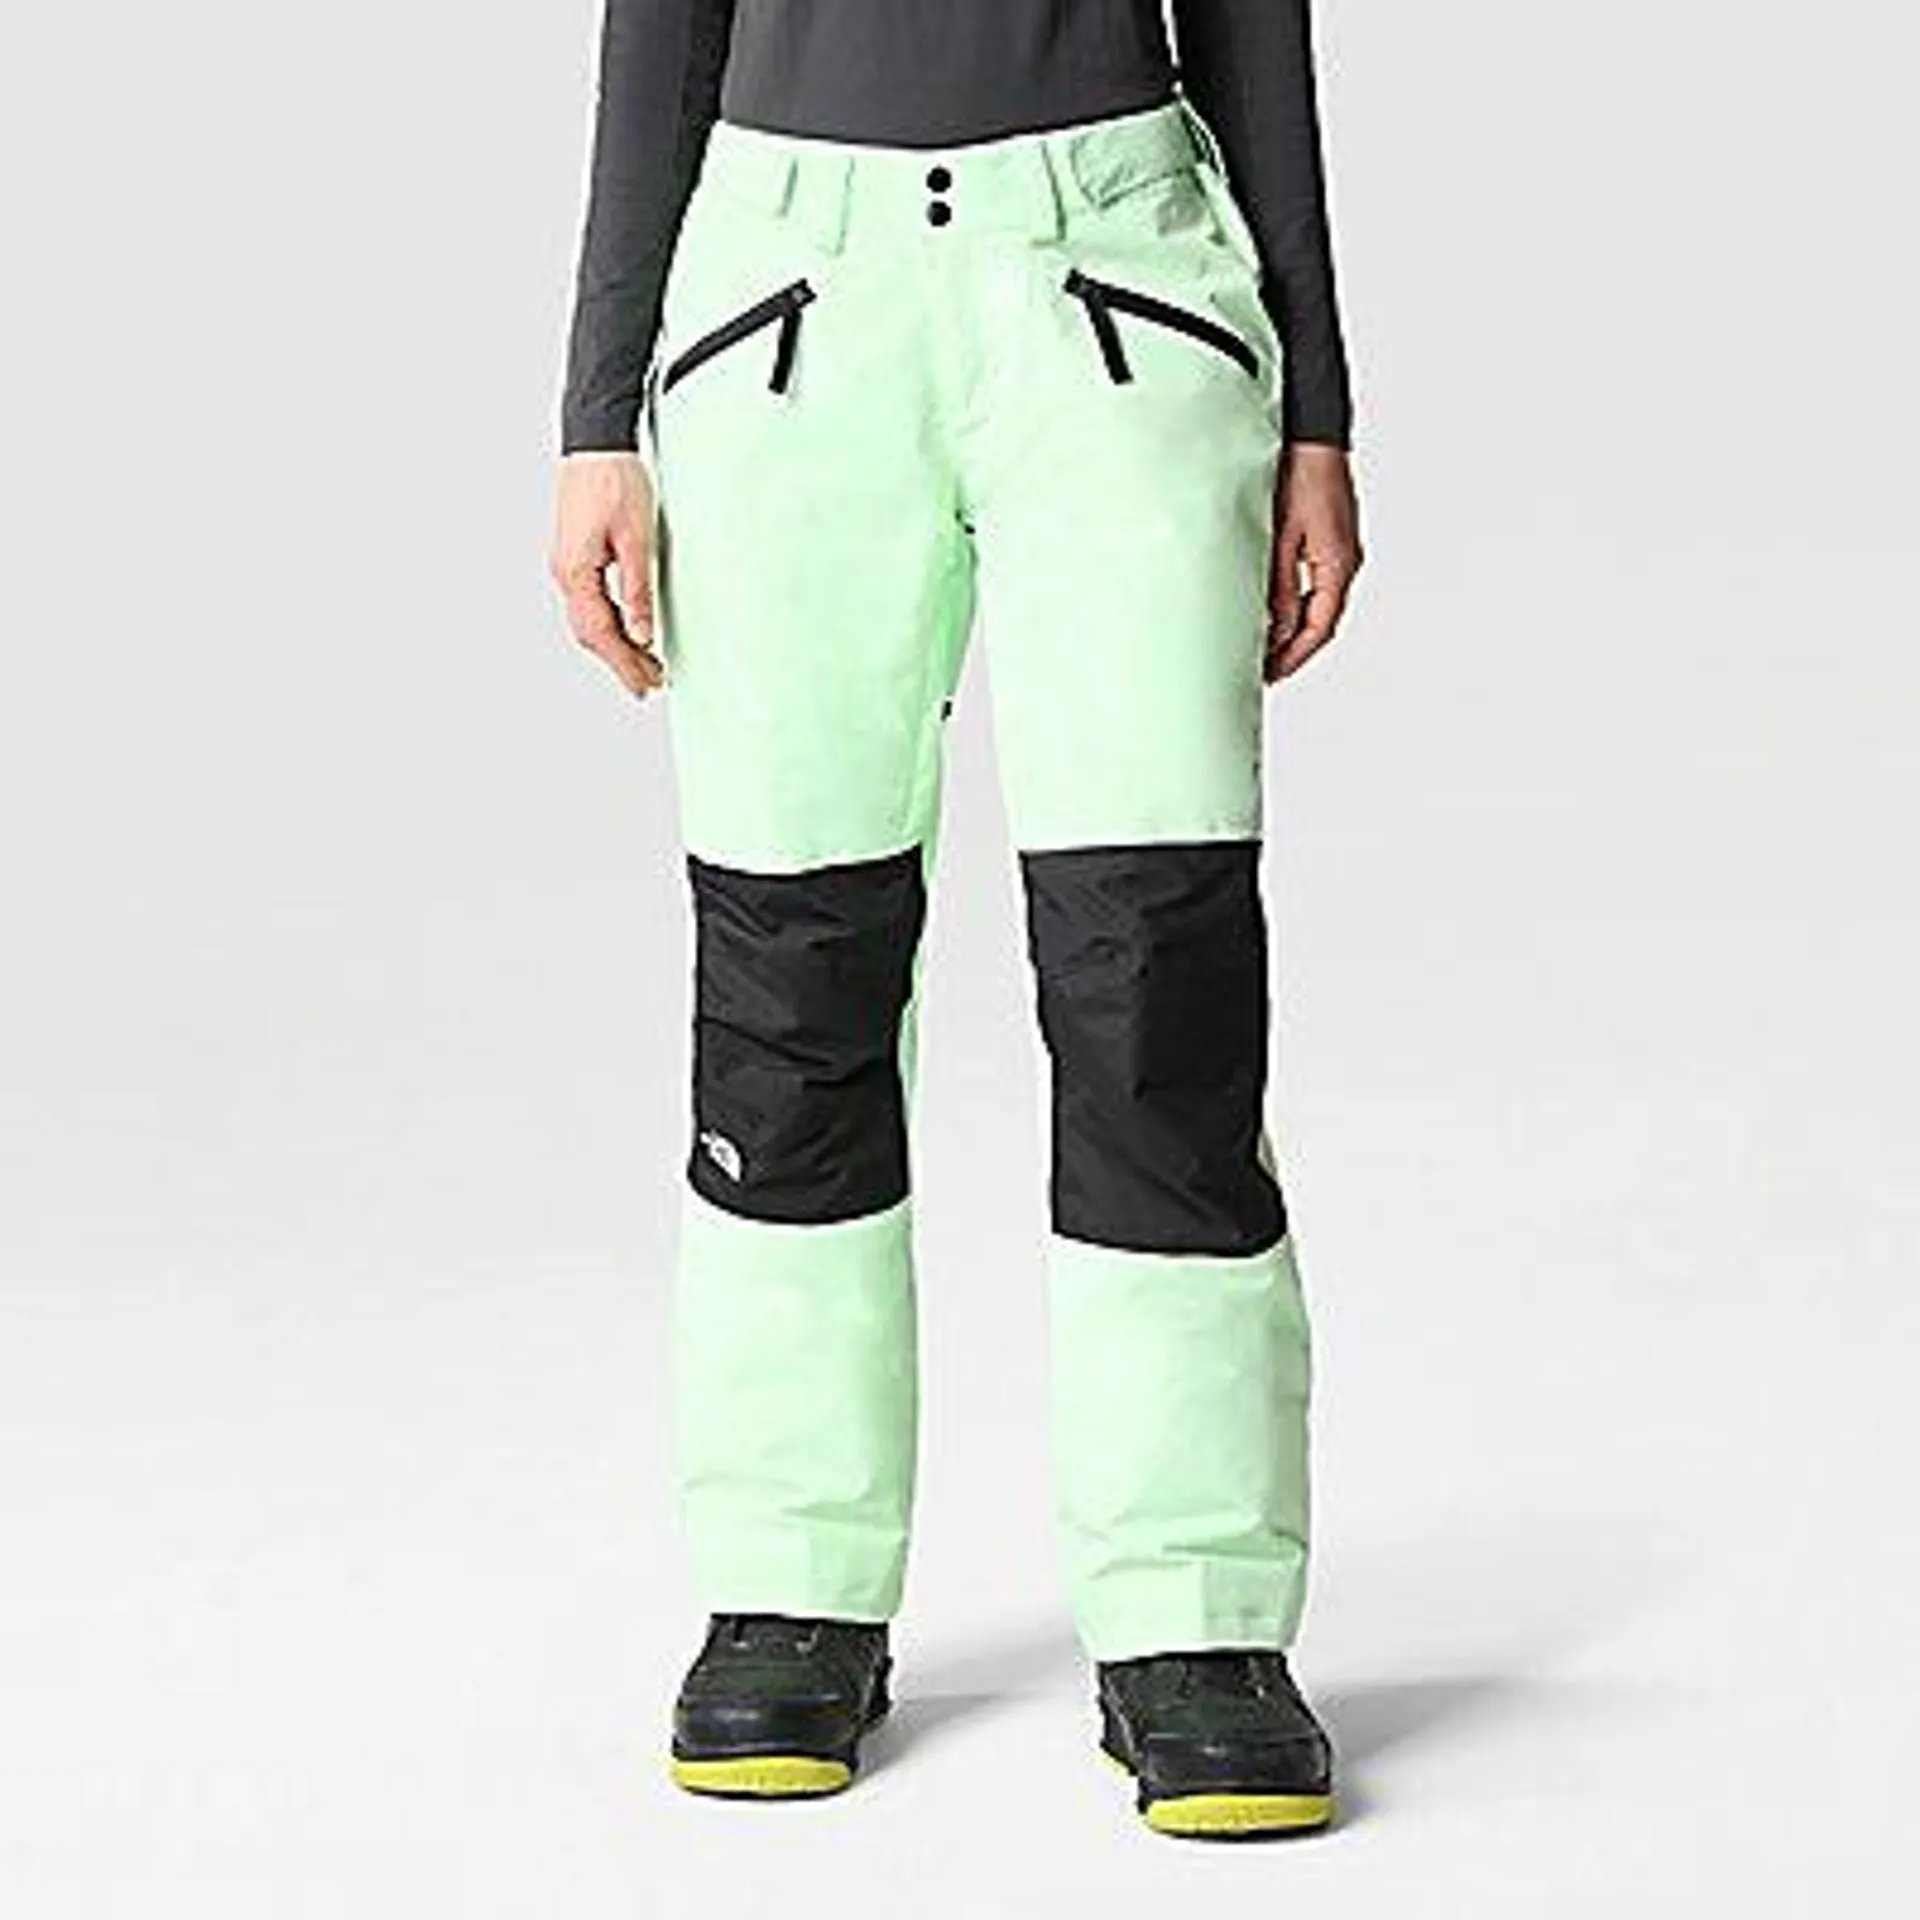 Women's Aboutaday Ski Trousers